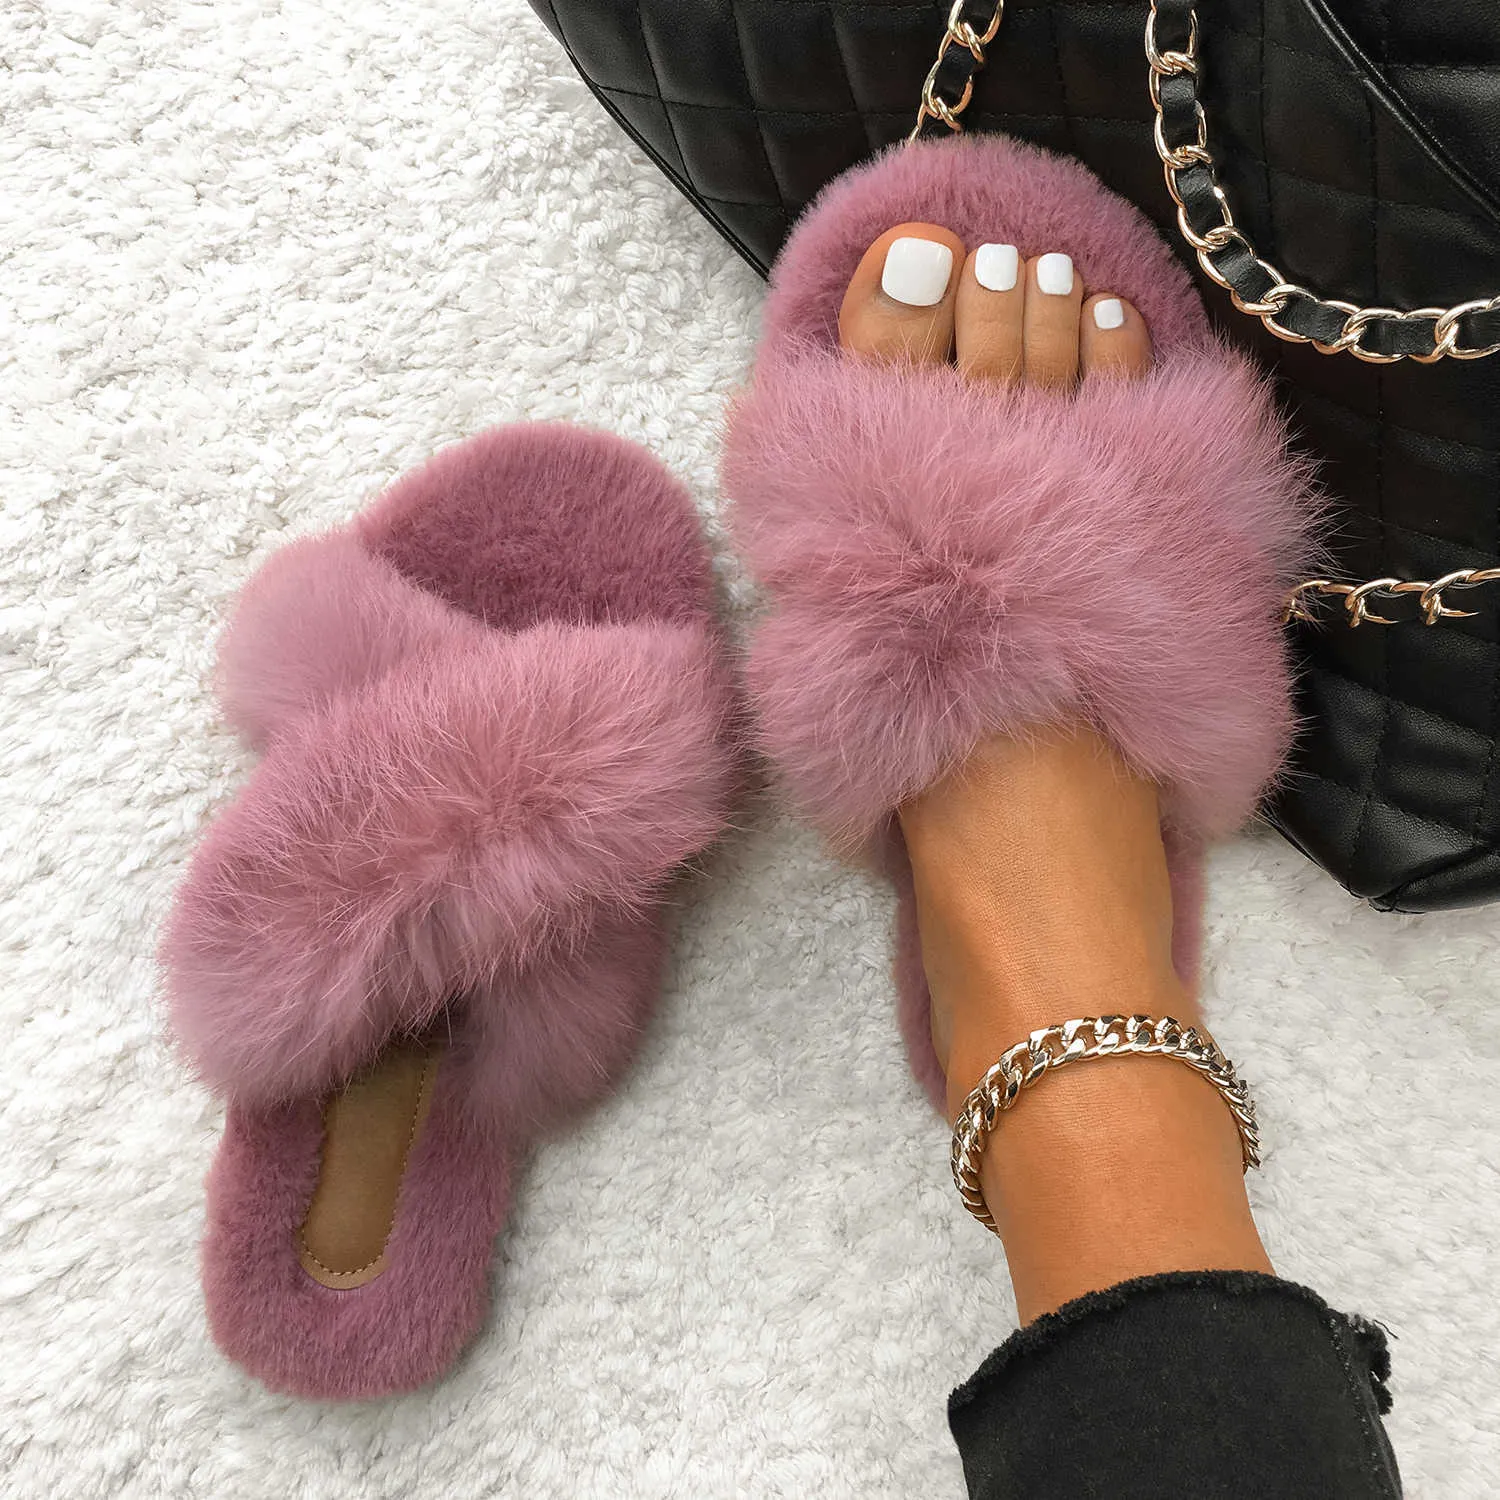 Faux Fur Slippers Furry Slides For Women Fluffy Flip Flops Home Cozy Slippers Winter House Plush Female Shoes Slip On Flats 2021 Y0902